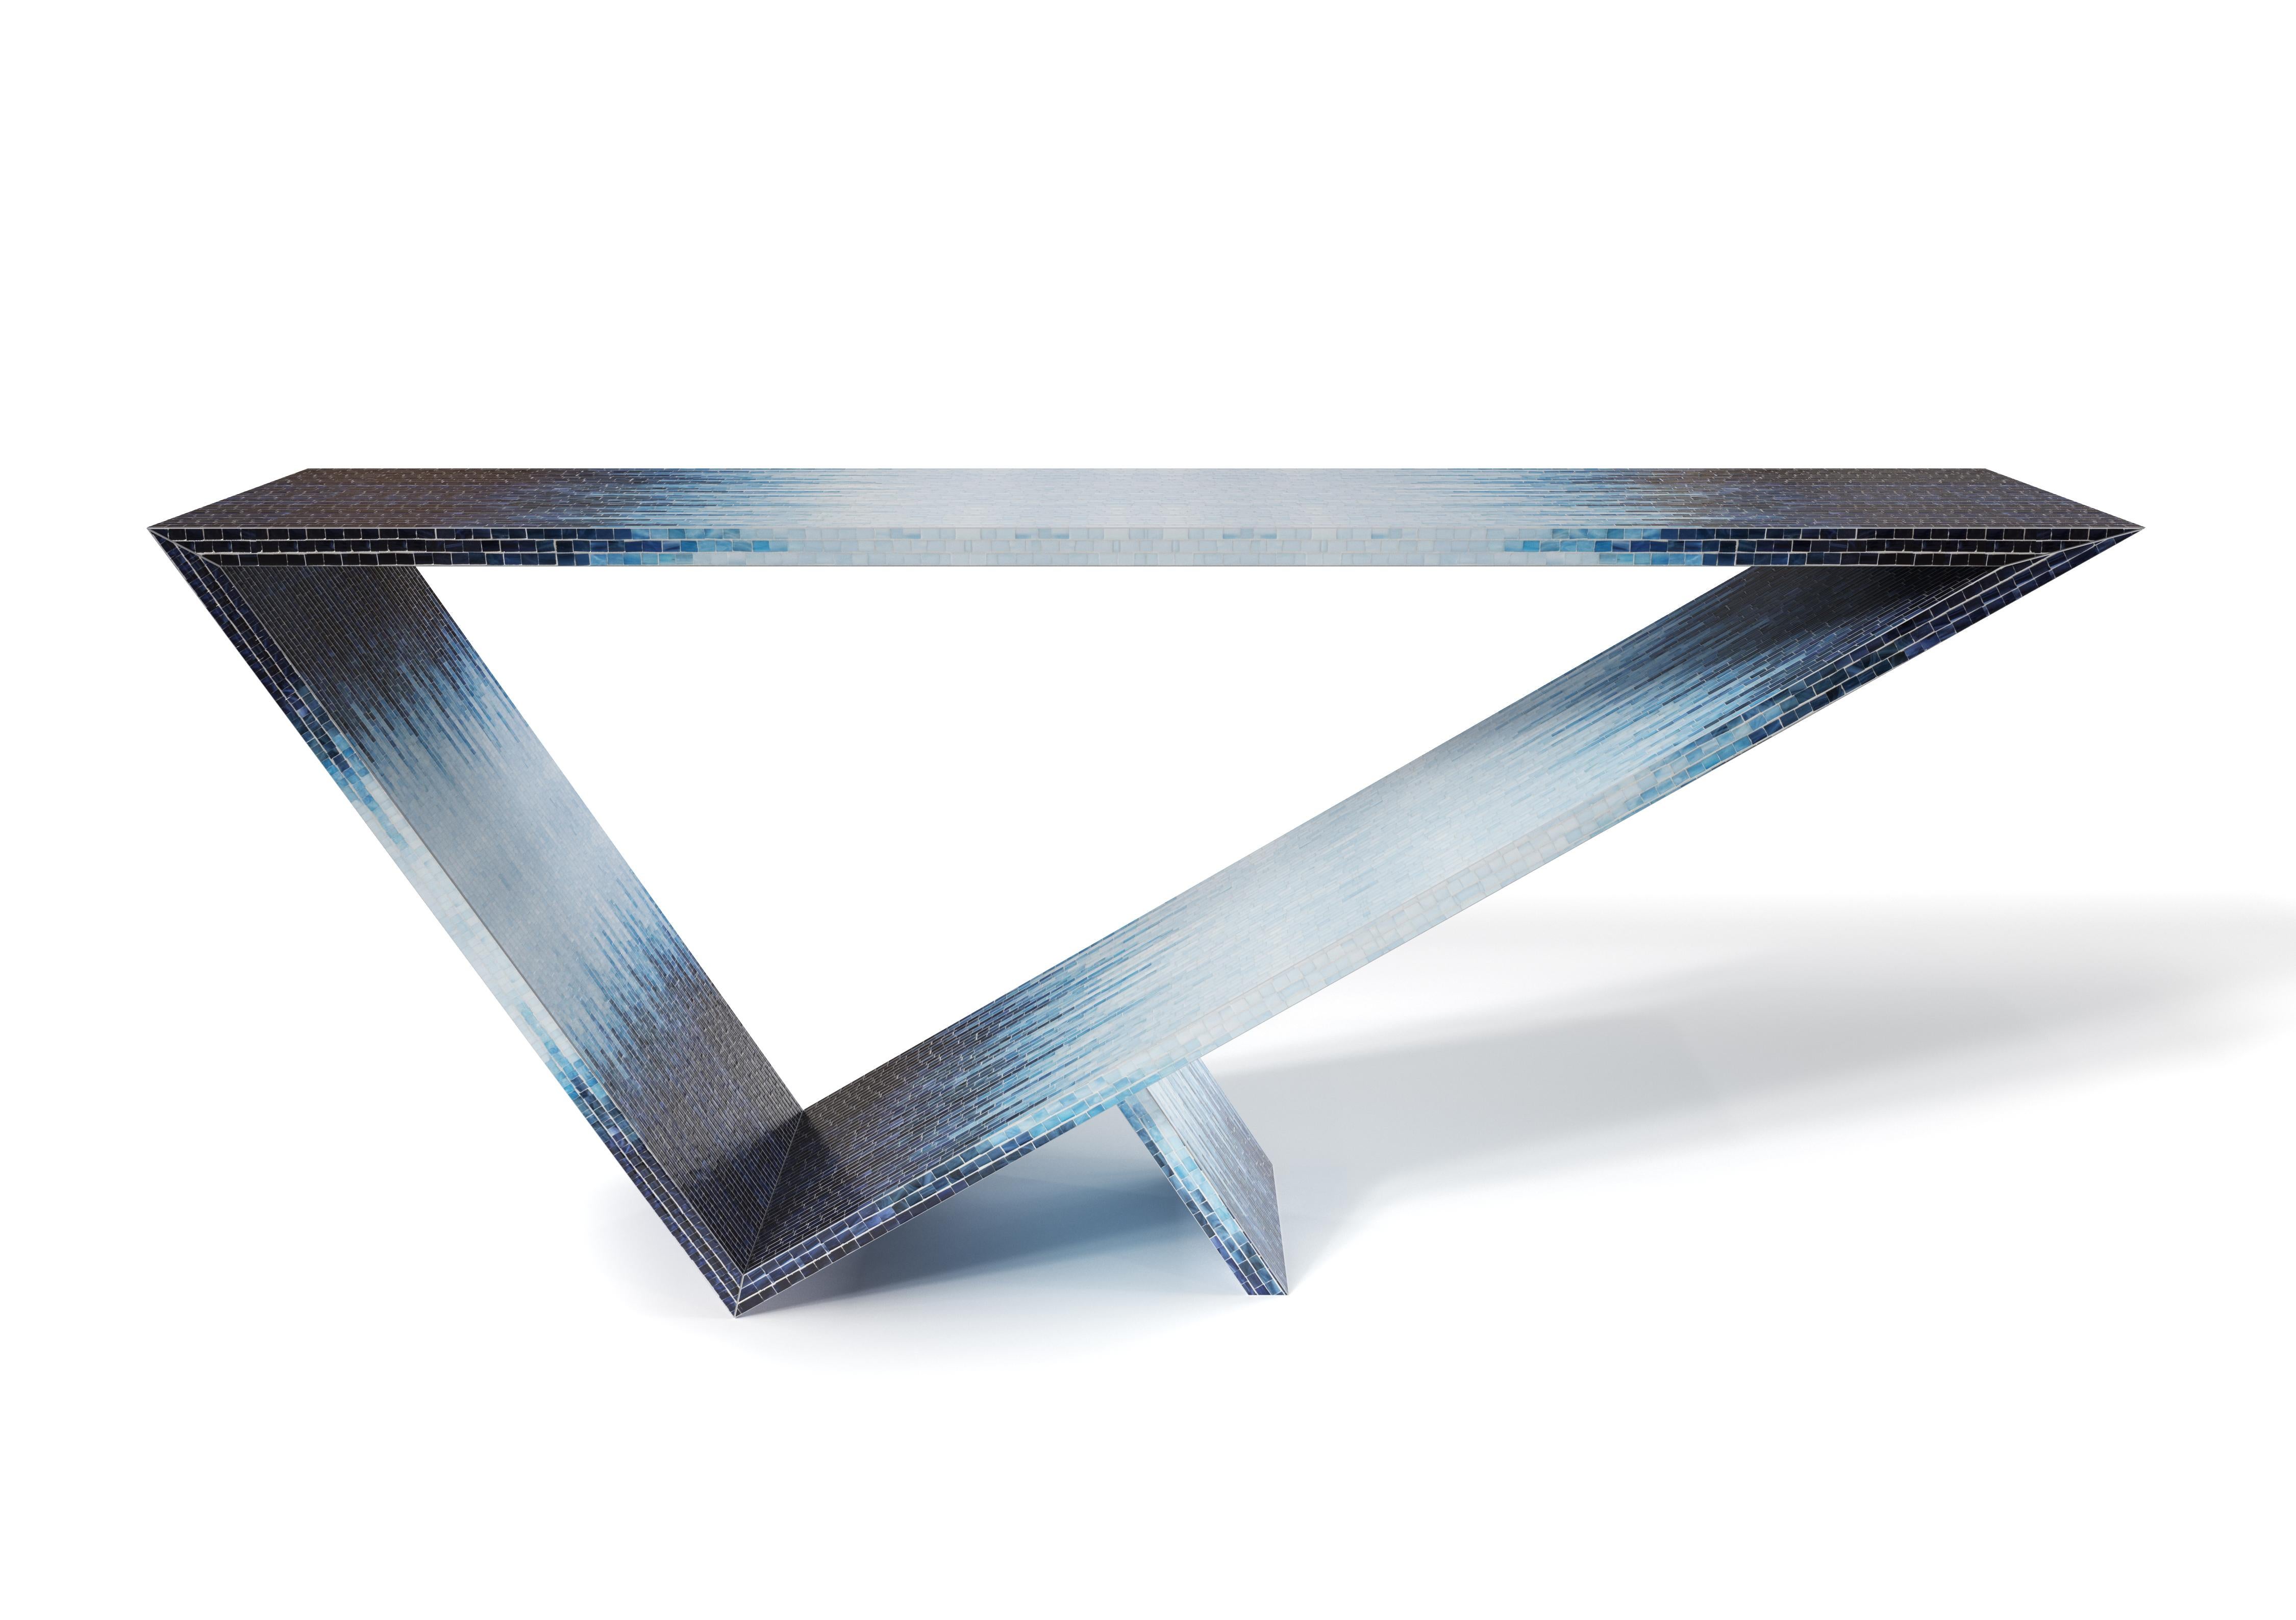 Time/space portal blue ombre console #1 by Neal Aronowitz Design
Dimensions: D 172.7 x W 43.2 x H 76.2 cm
Materials: Glass tile mosaic.
This table can be fabricated in any custom mosaic color and pattern. 

The inspiration for the Time/Space